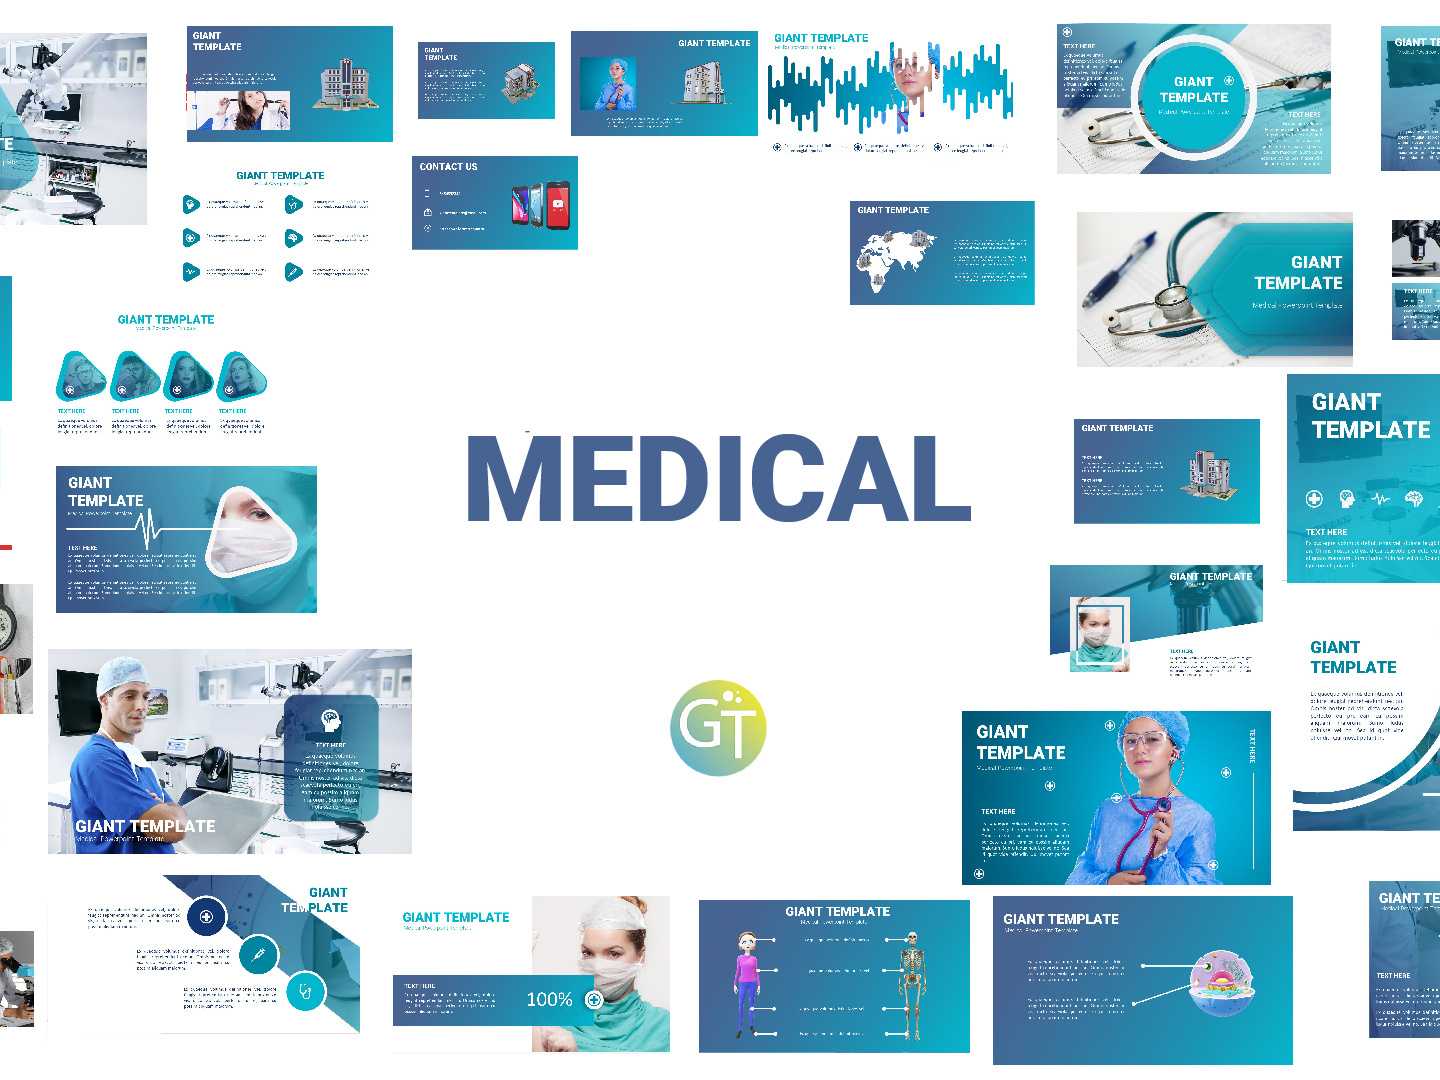 Medical Powerpoint Templates Free Downloadgiant Template Pertaining To Powerpoint Animation Templates Free Download